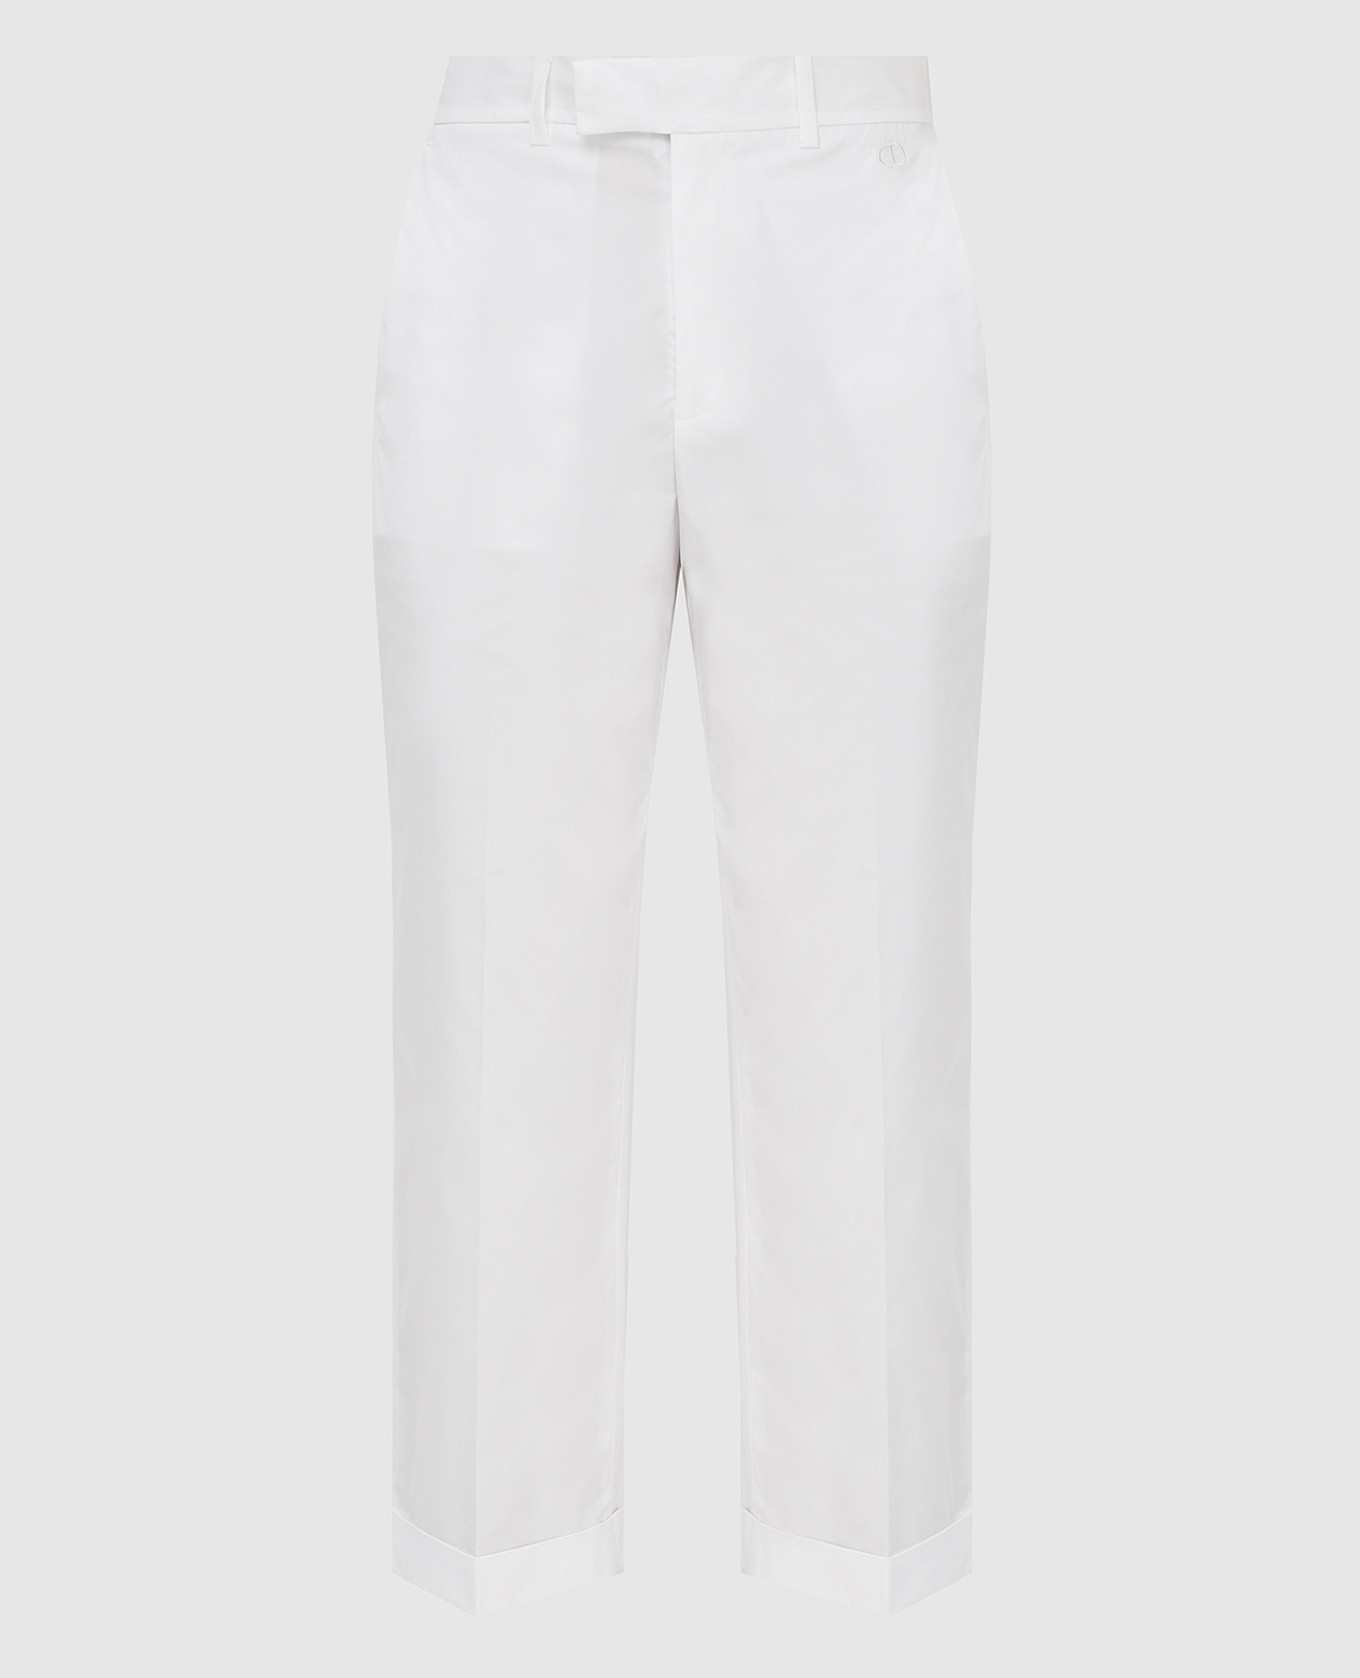 White cropped trousers